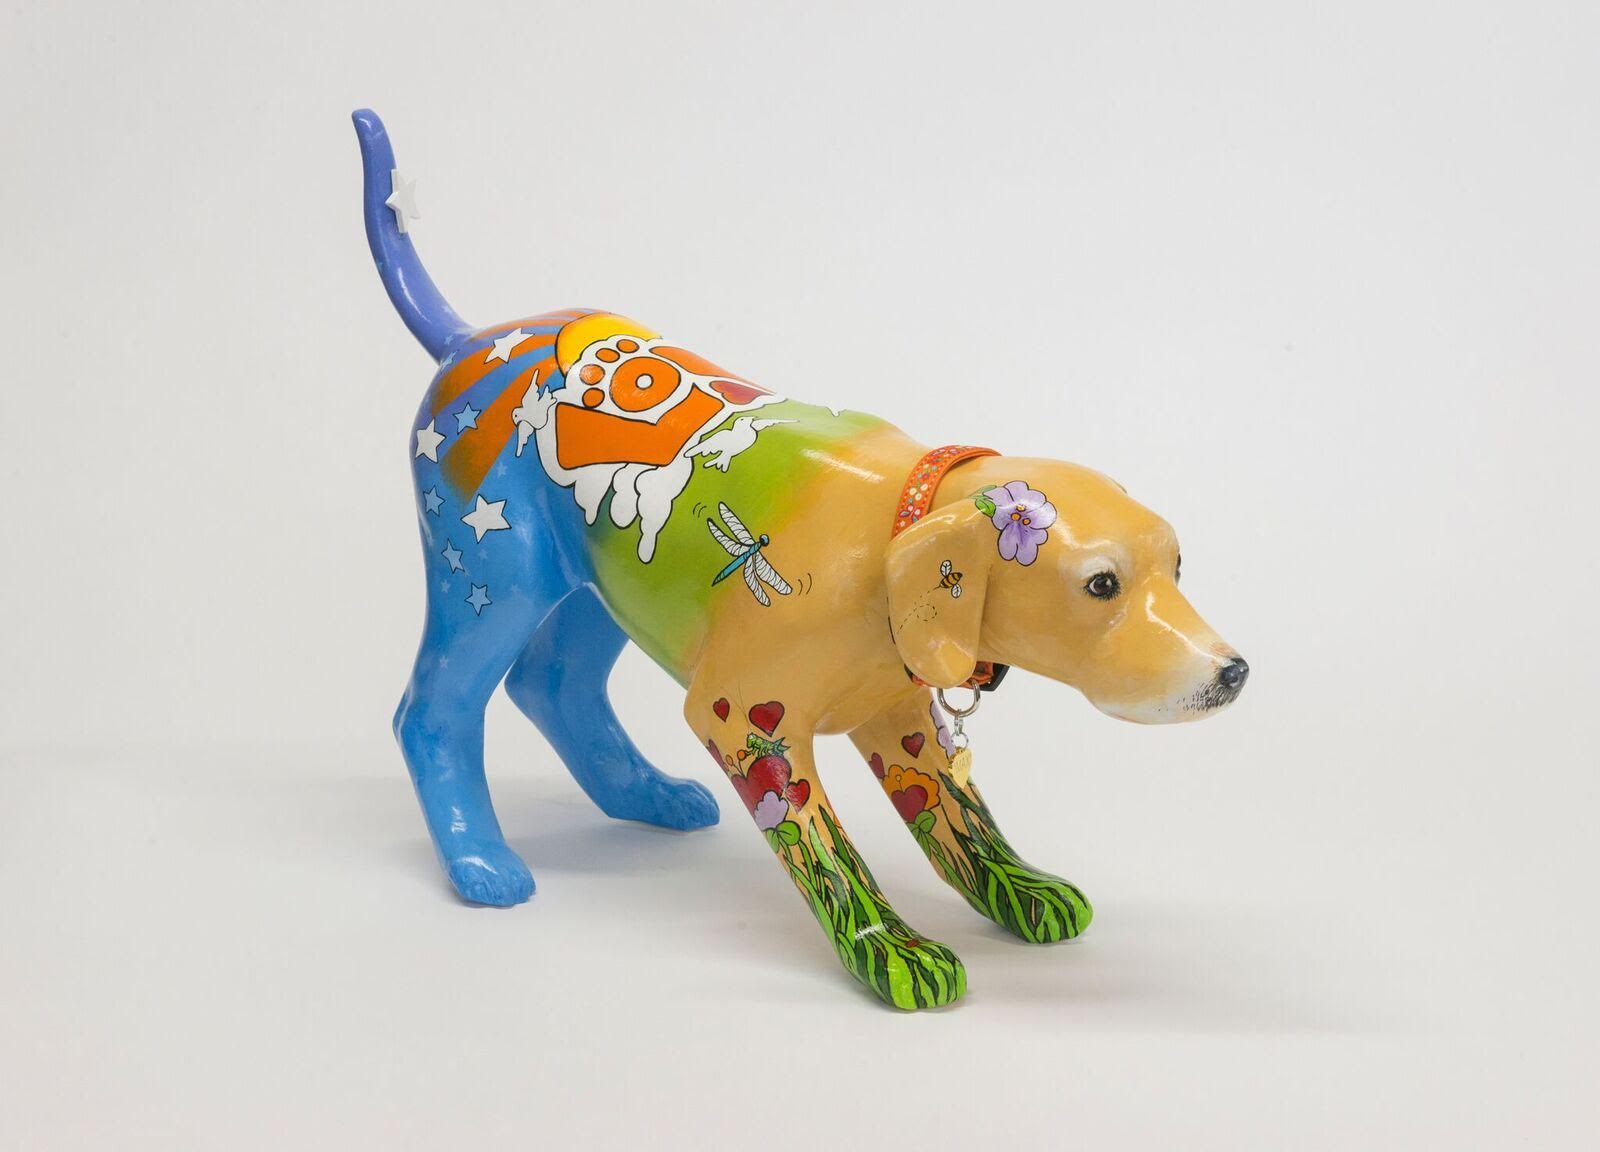 Mara McCalmont's sculpture, "Peter Max" Painted Pet, will be part of the Petcasso fundraiser.